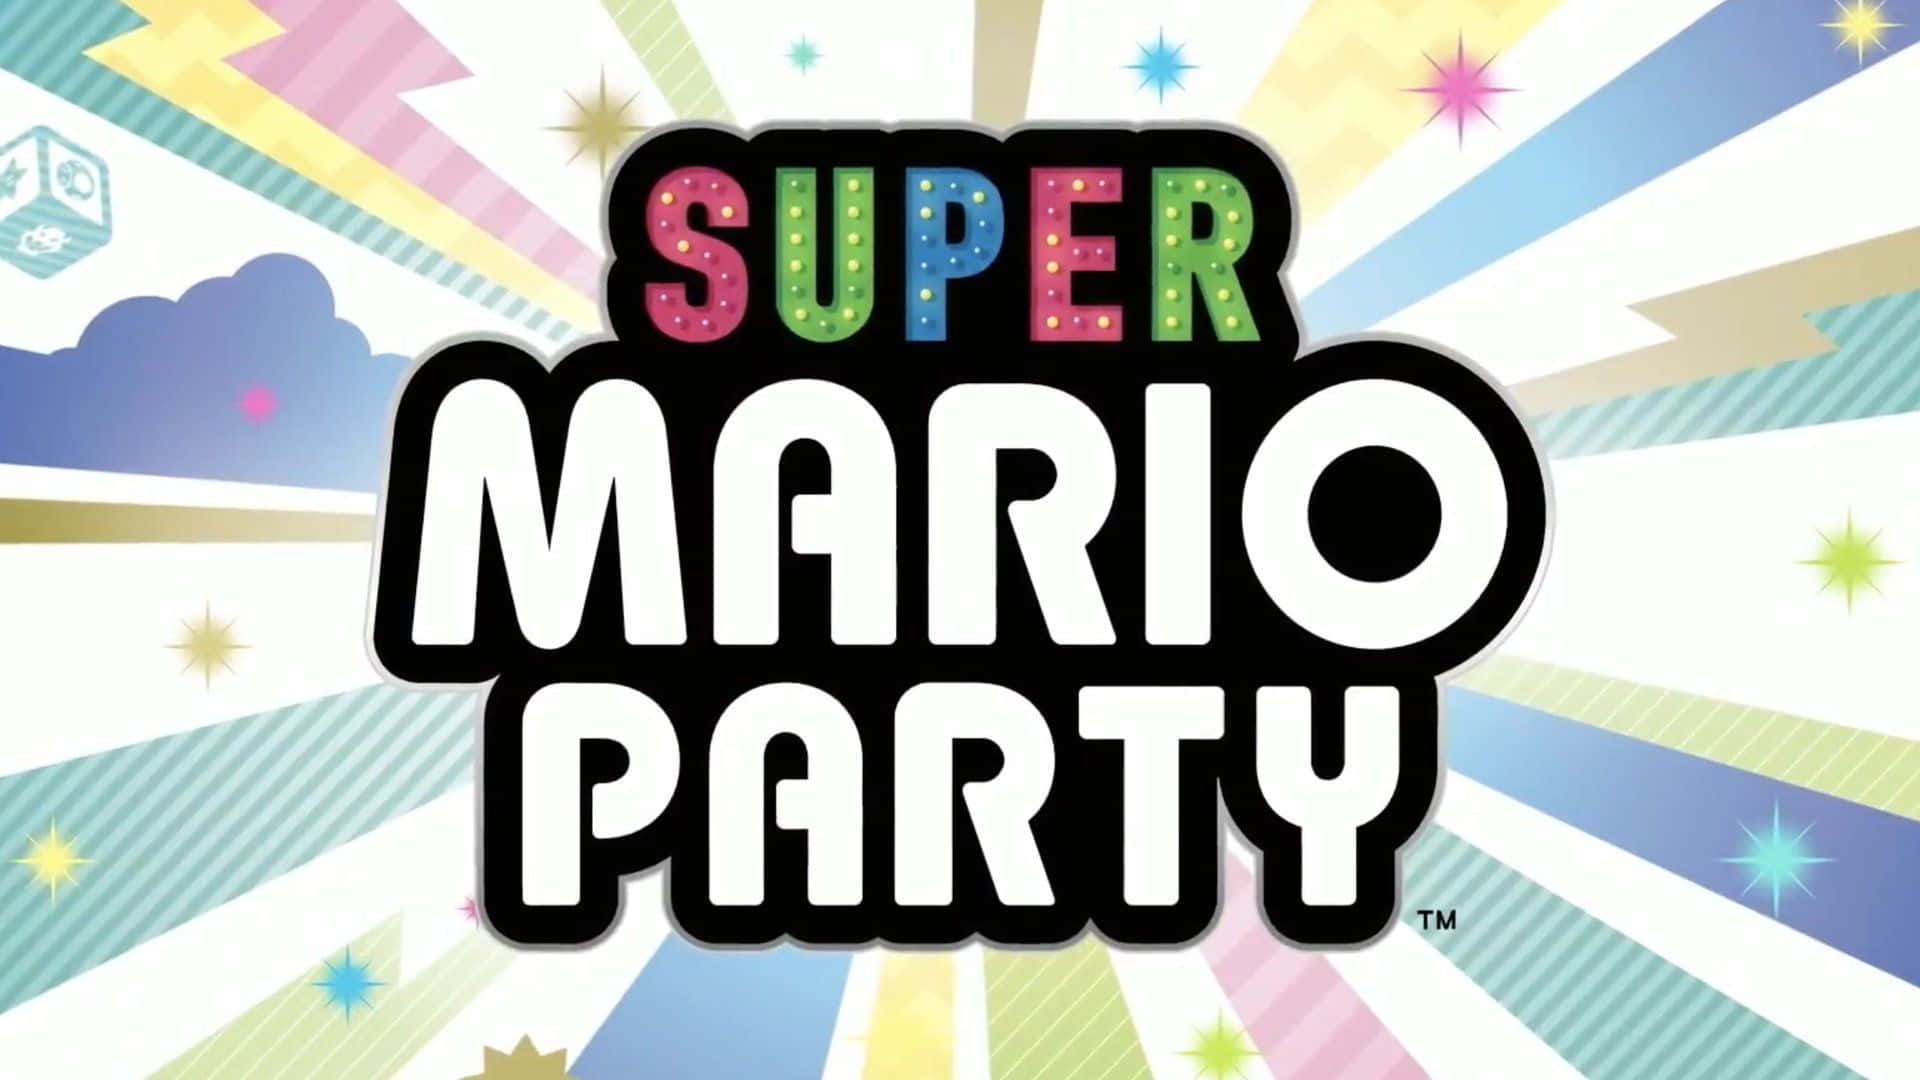 Caption: Exciting Super Mario Party Gameplay on Vibrant Game Board Wallpaper